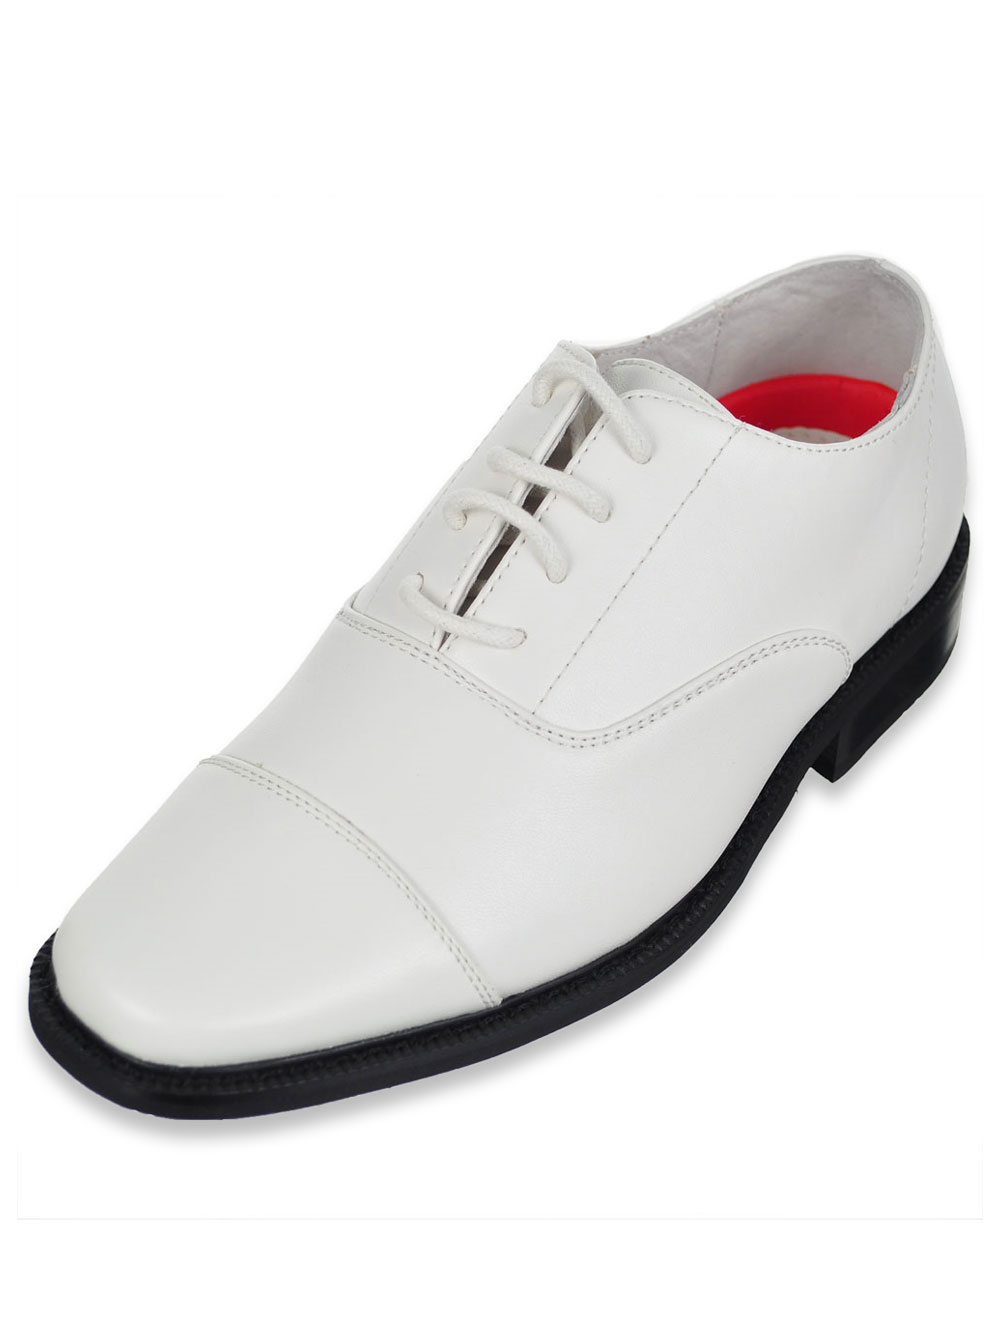 kids dress shoes for boys